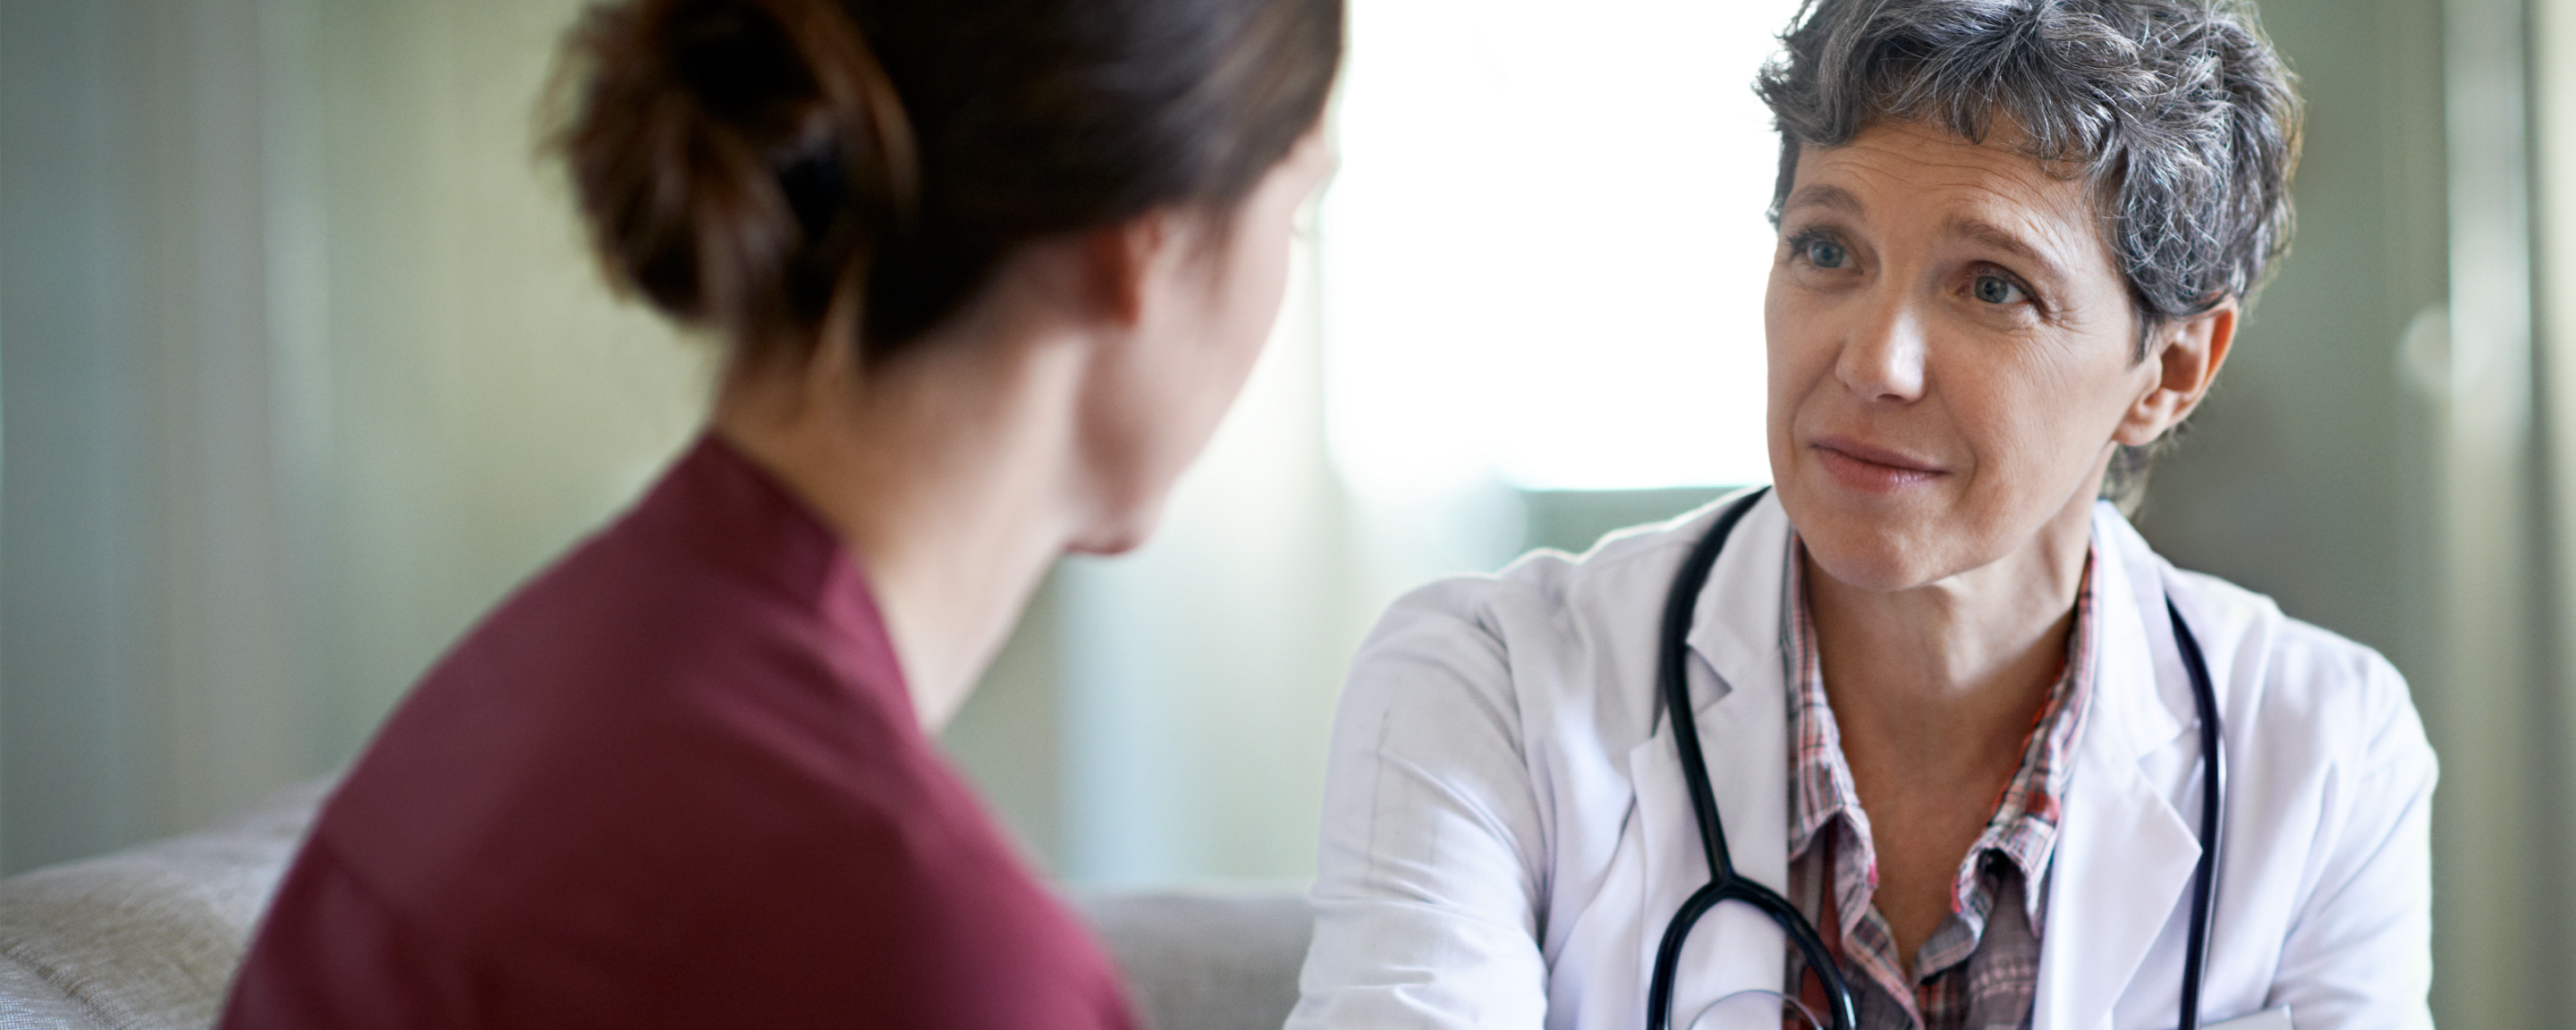 Woman physician talking with pregnant woman